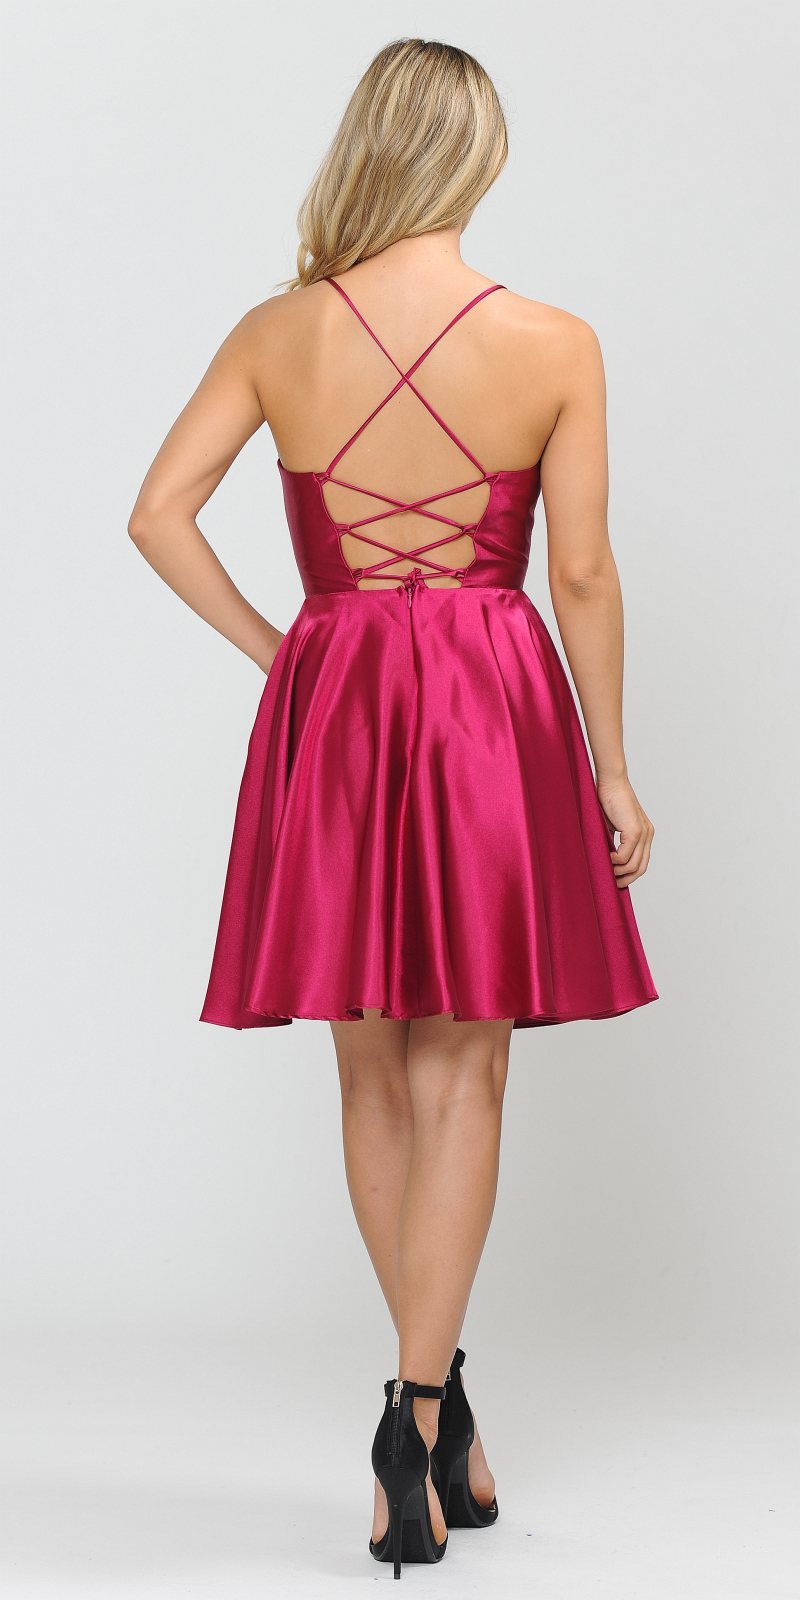 Poly USA 8542 Romper Style Short Homecoming Dress Magenta